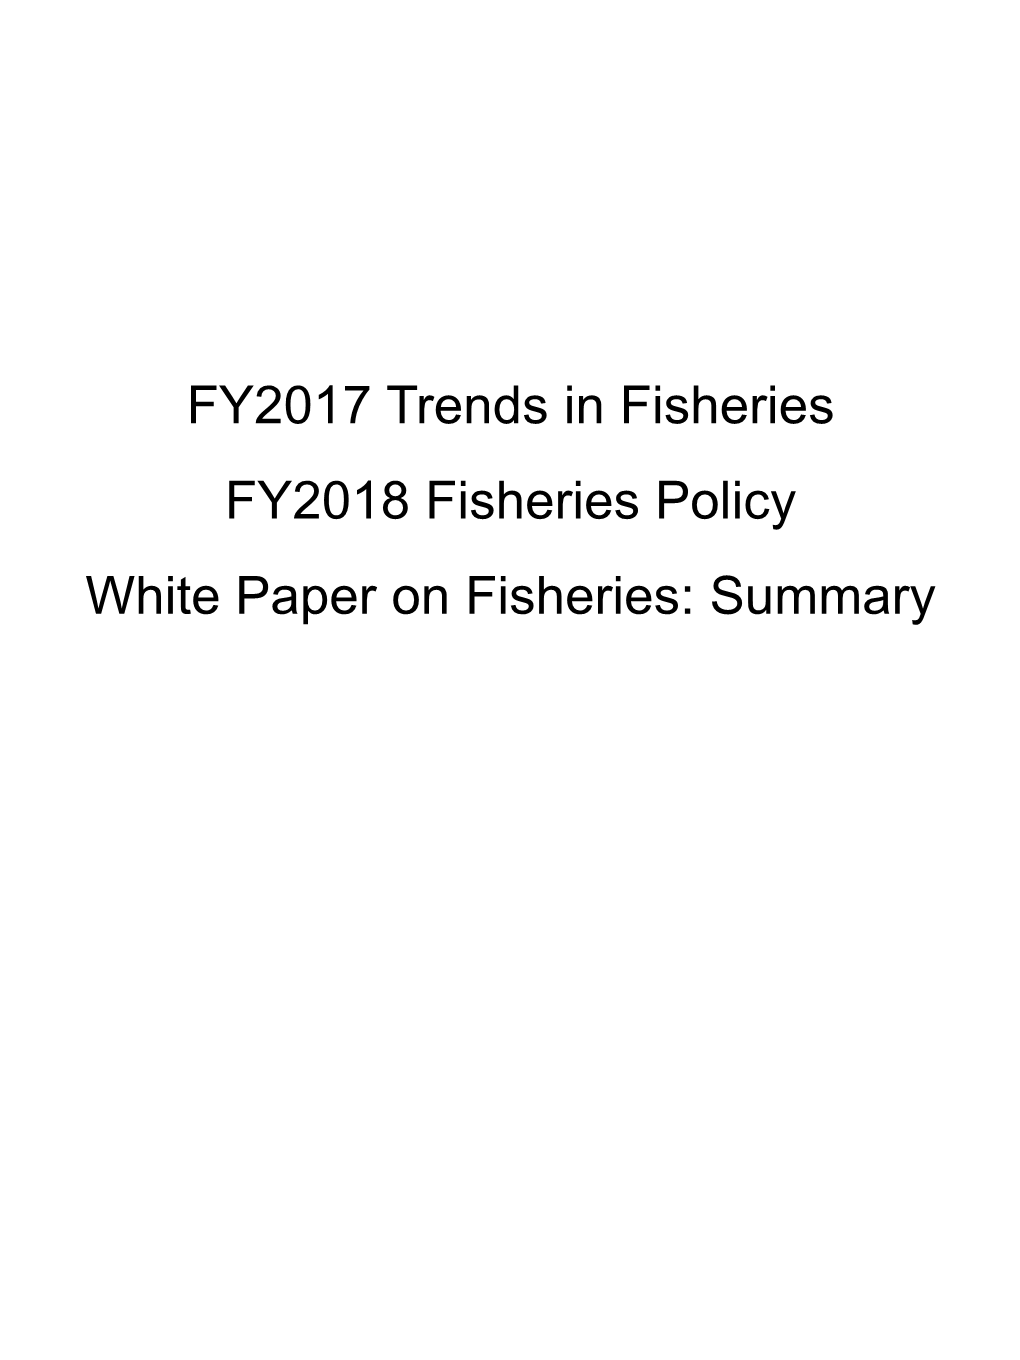 Fisheries Agency, Based on Various Materials